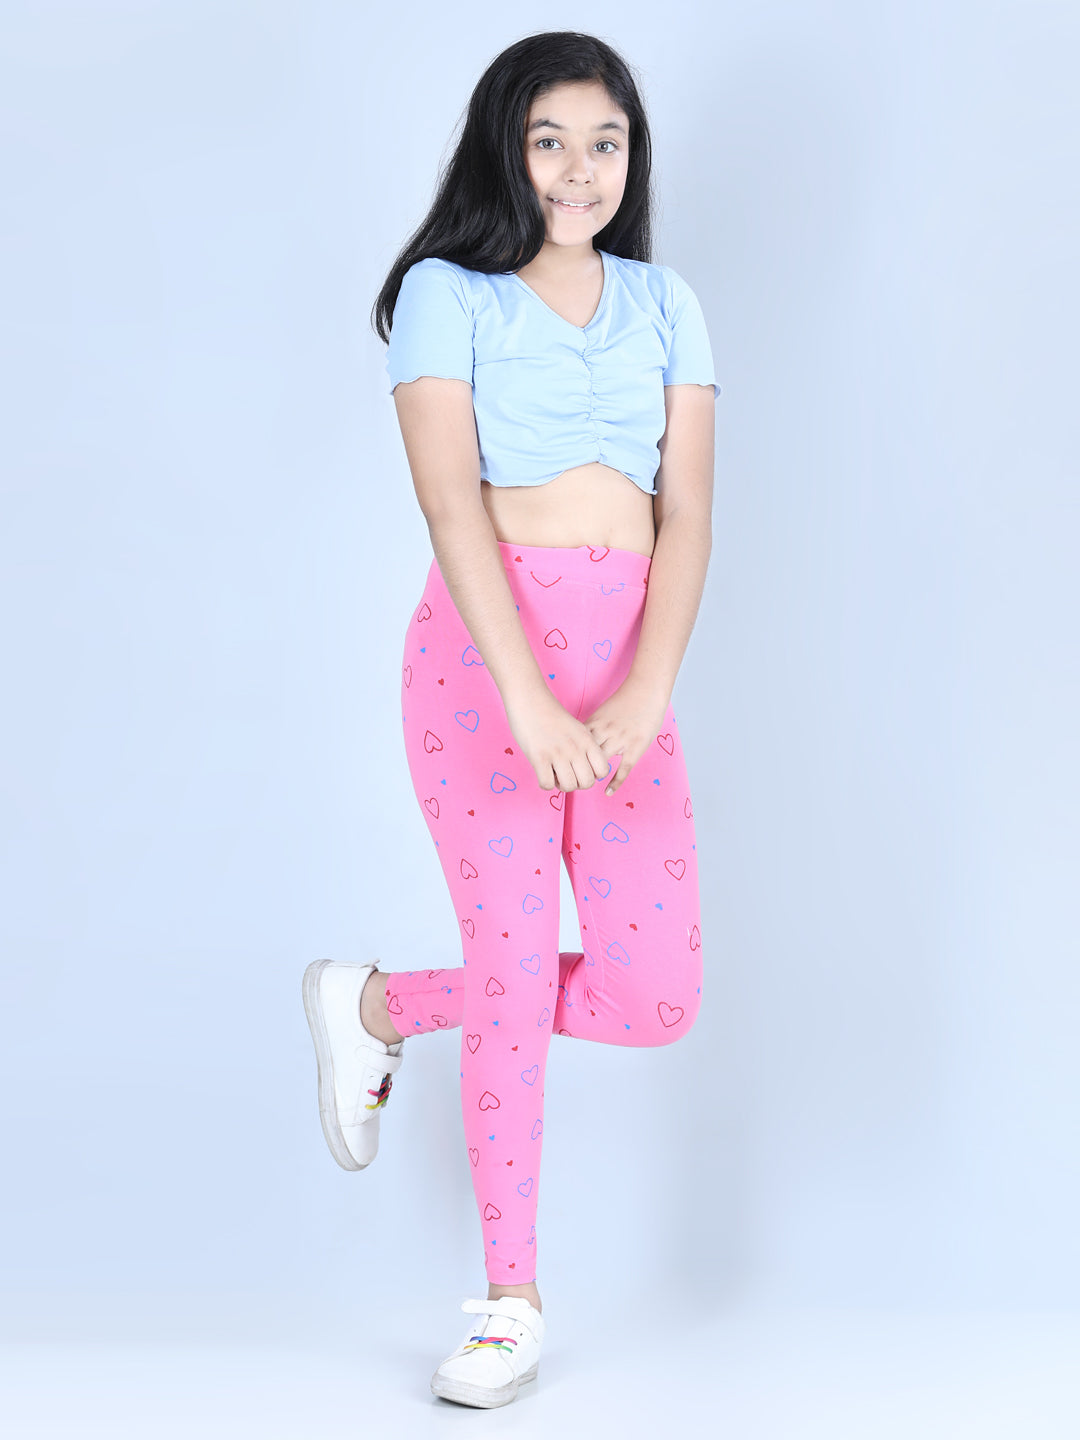 Girls Heart Printed Leggings with Flat Waistband- Pink